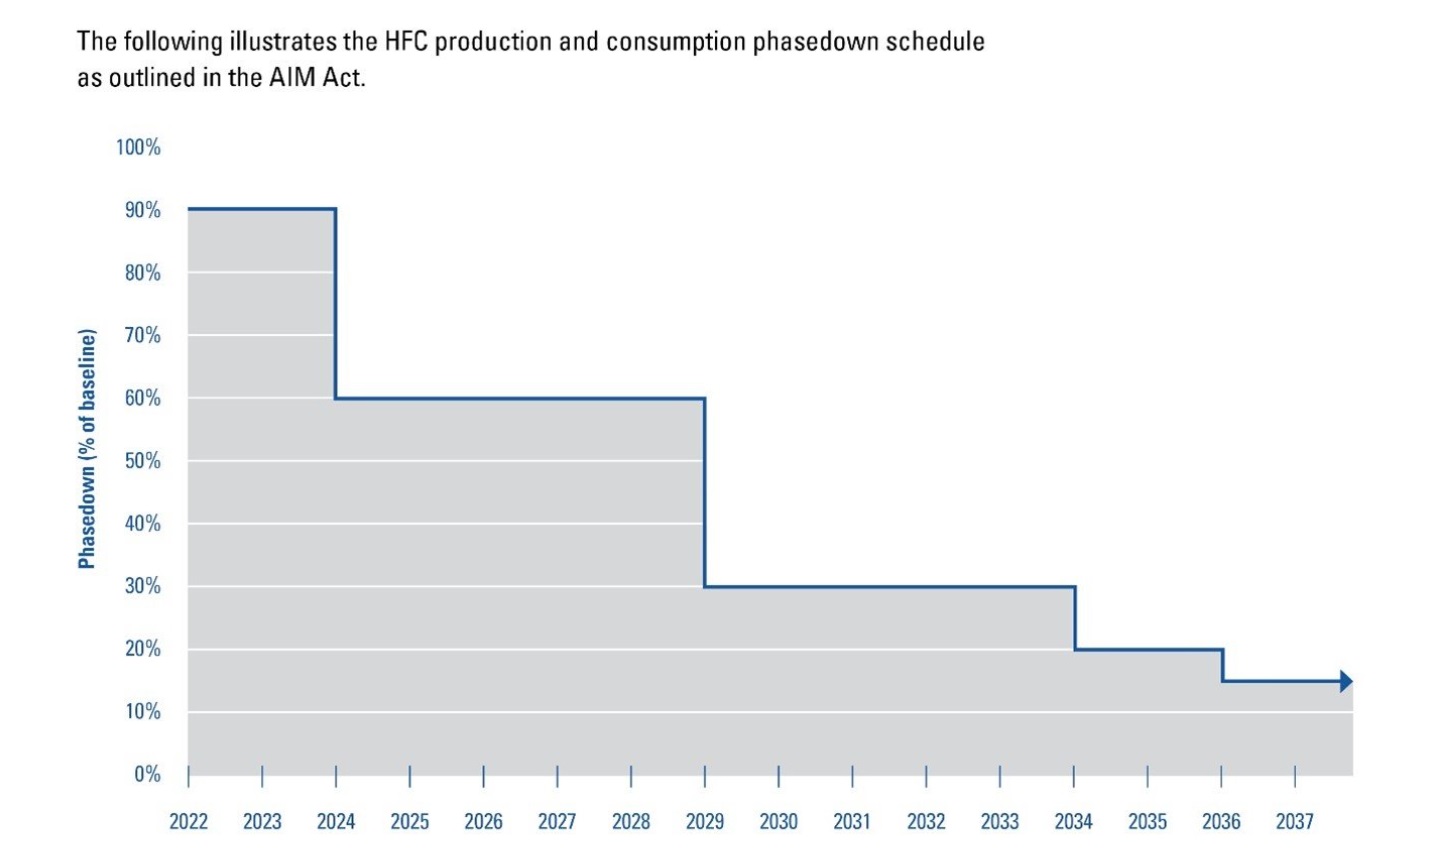 HFC production and consumption phasedown schedule.